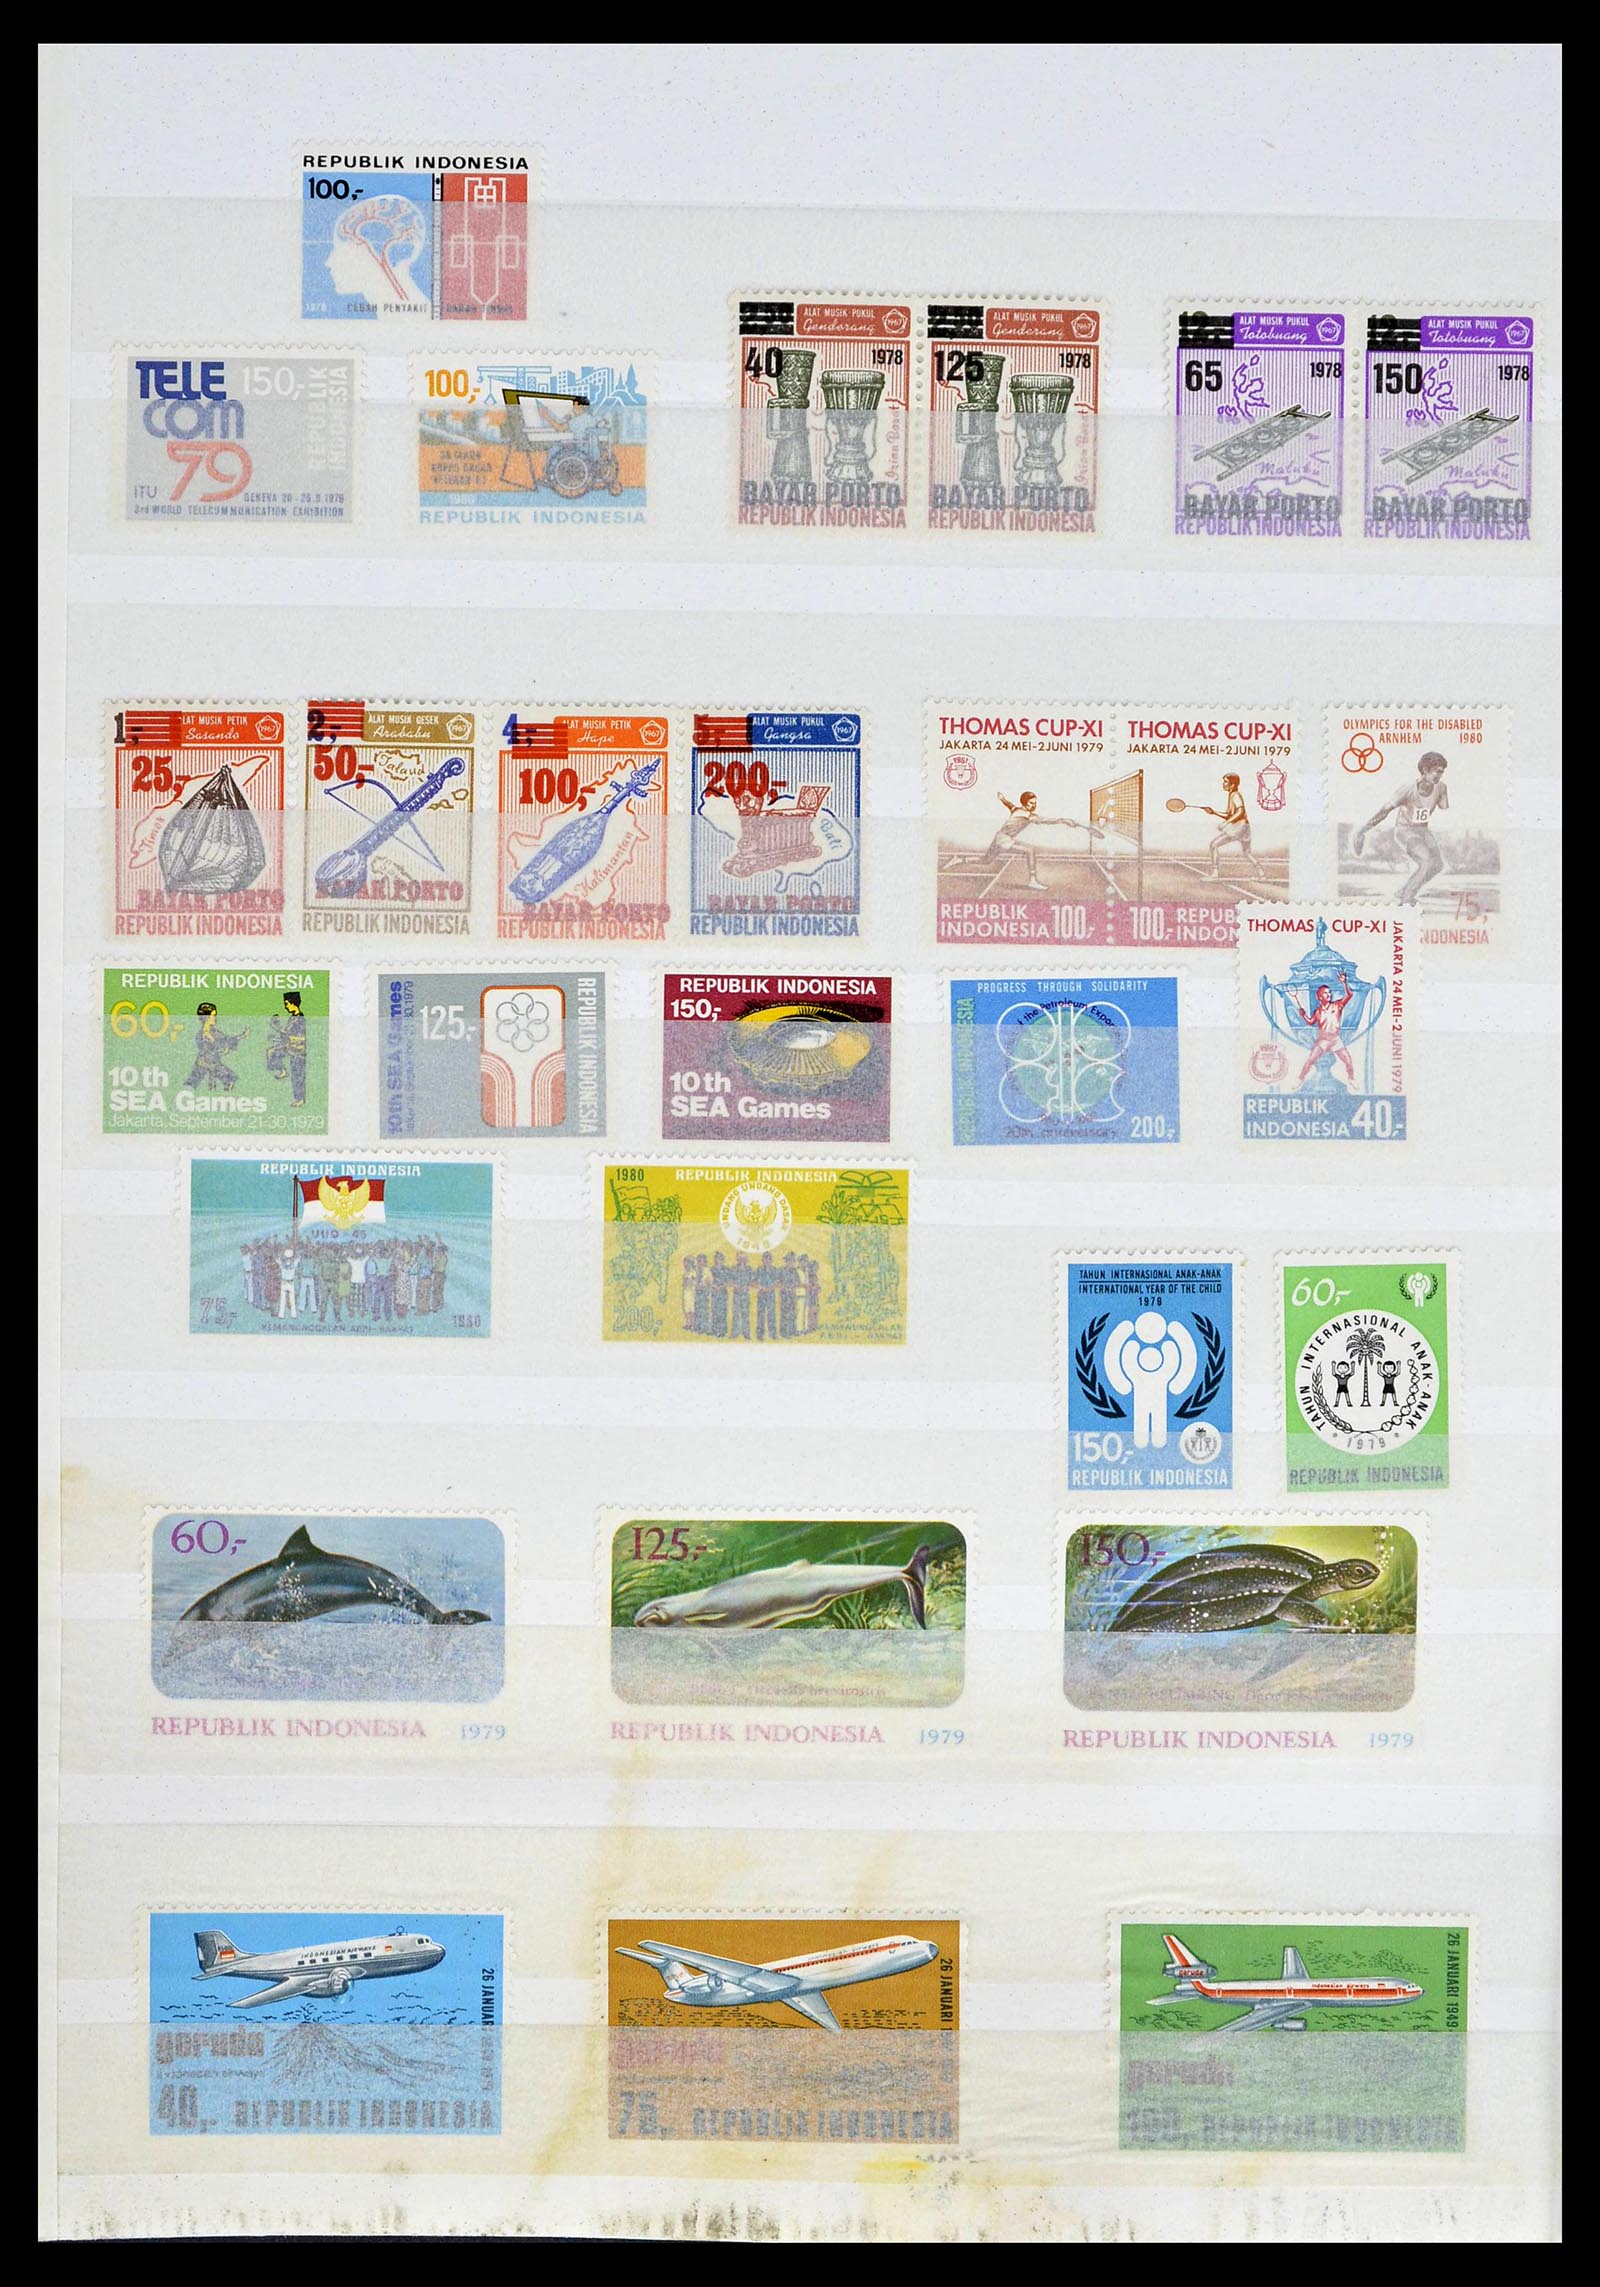 39244 0027 - Stamp collection 39244 Indonesia 1950-2003.